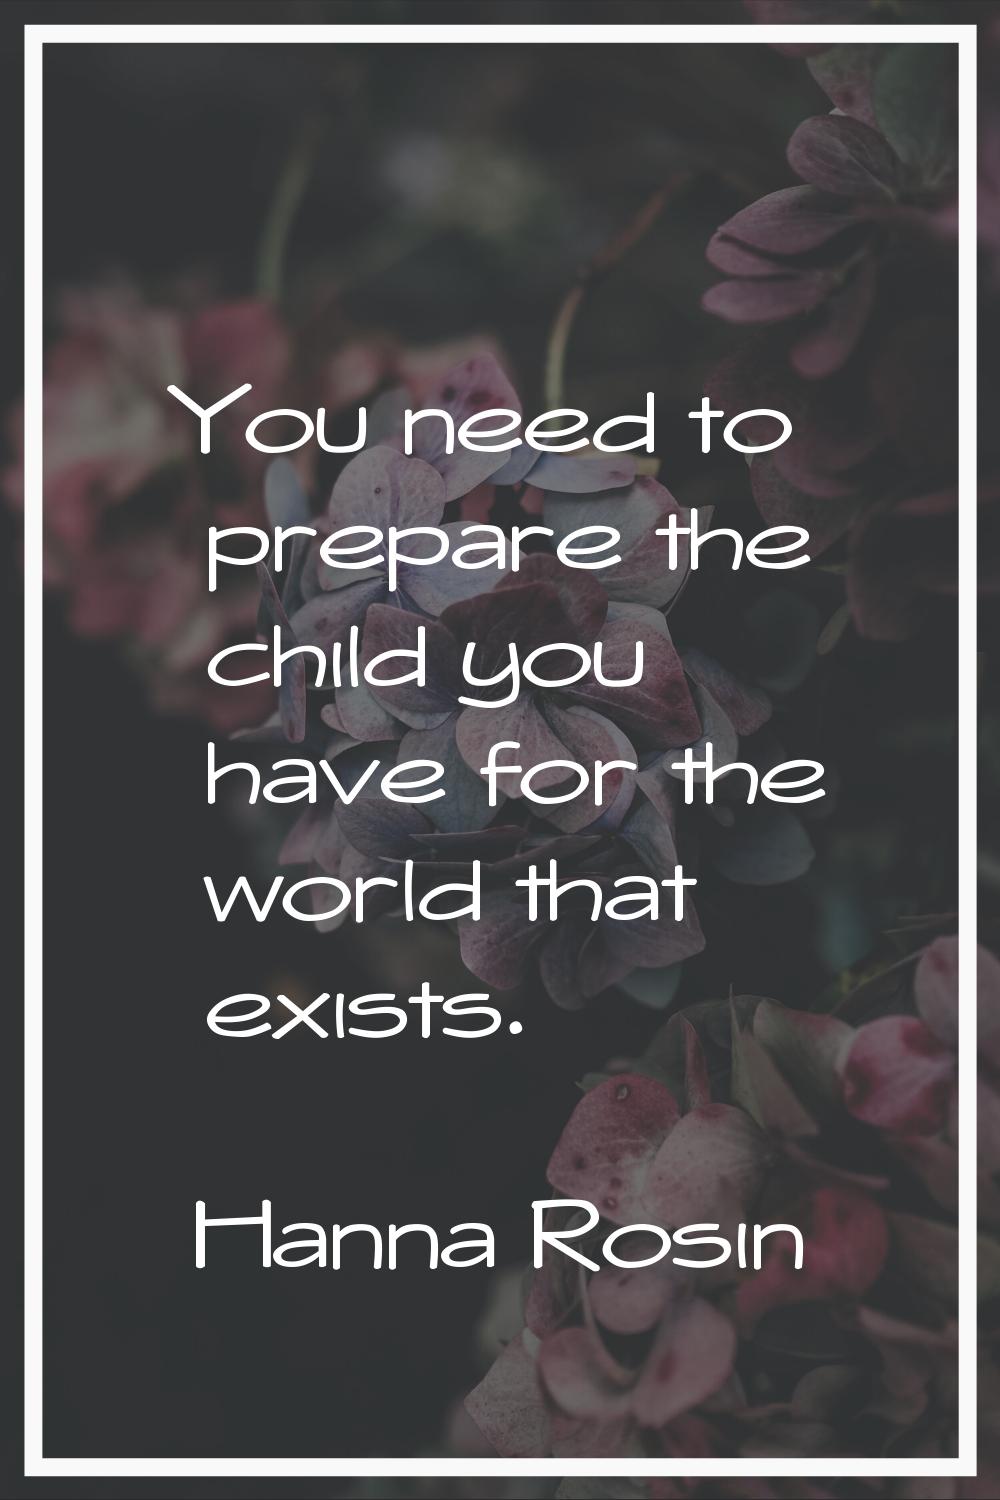 You need to prepare the child you have for the world that exists.